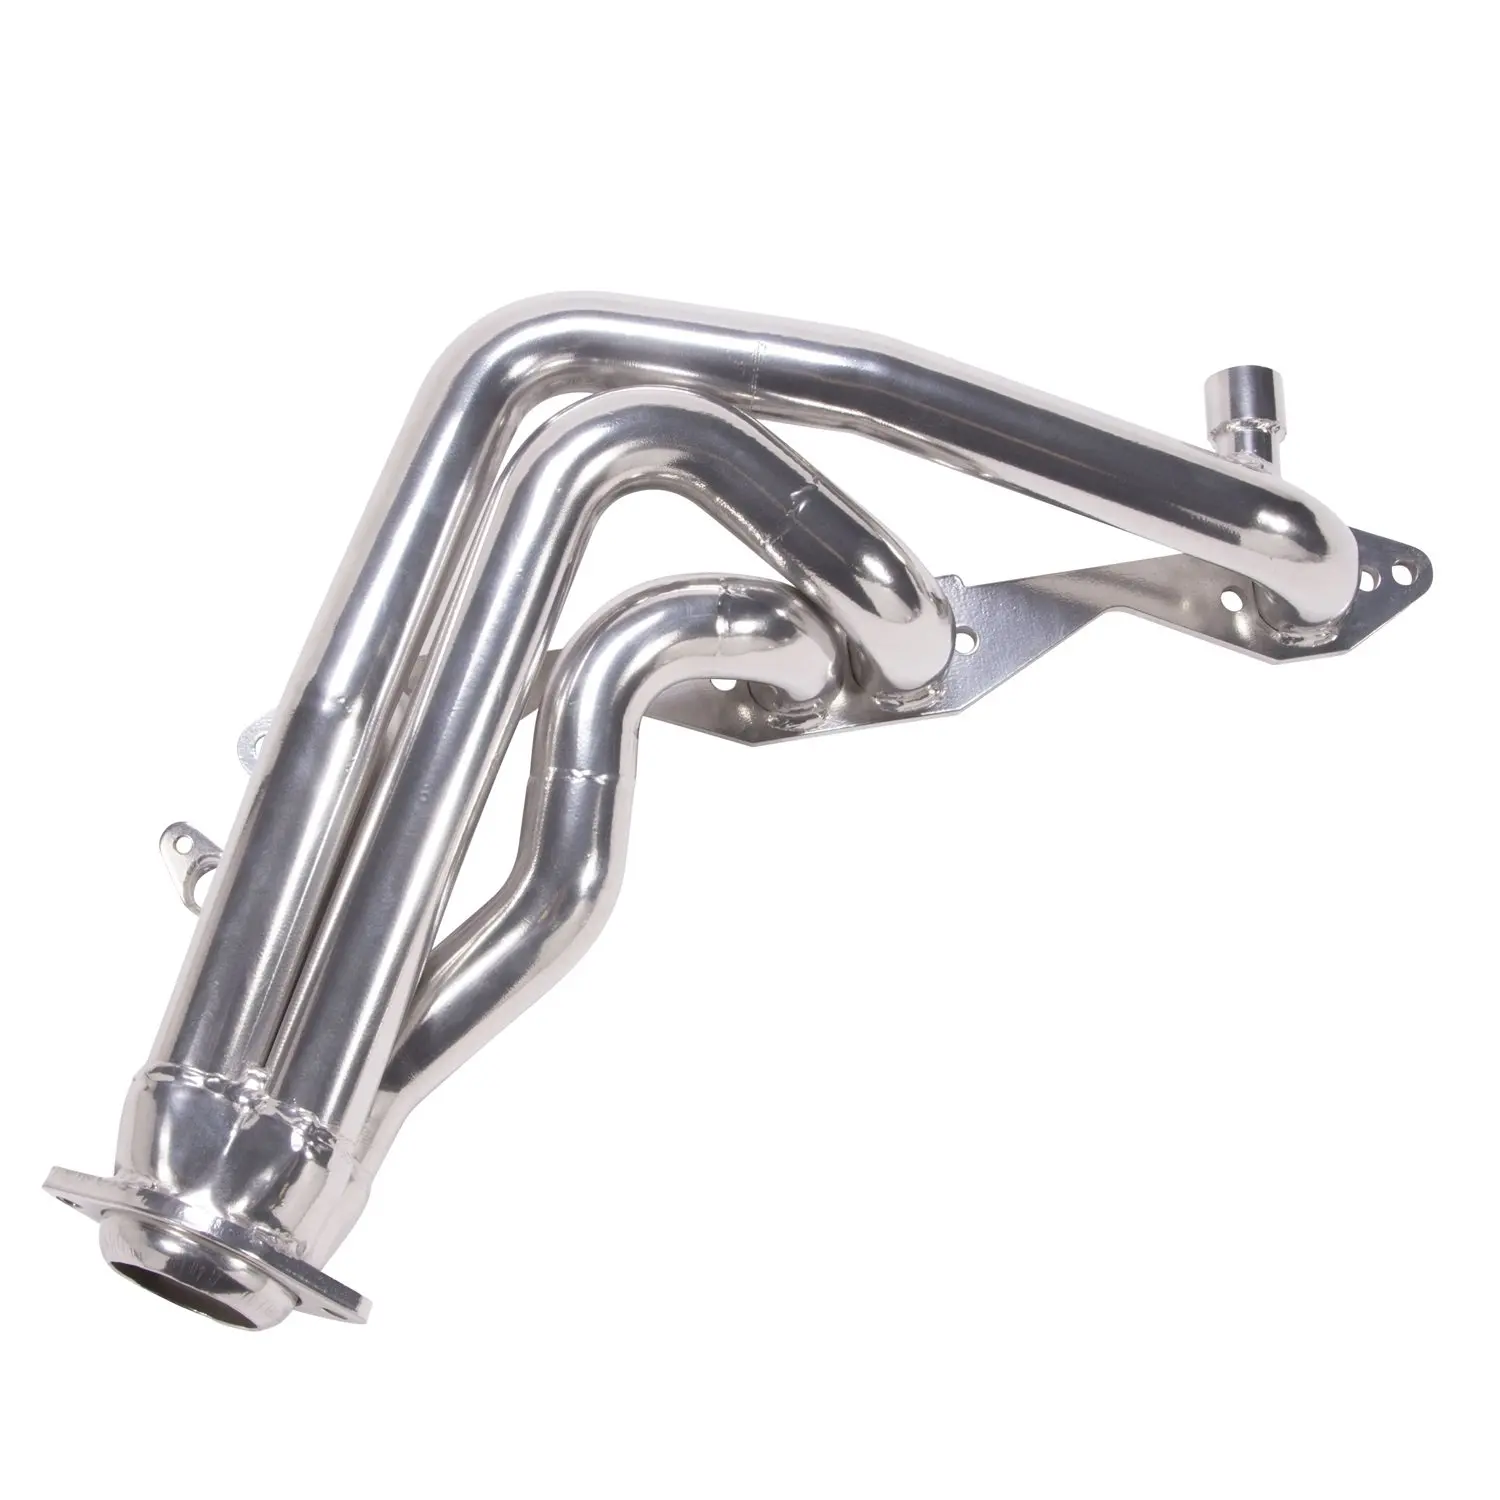 Cheap Dual Exhaust Chevy, find Dual Exhaust Chevy deals on line at